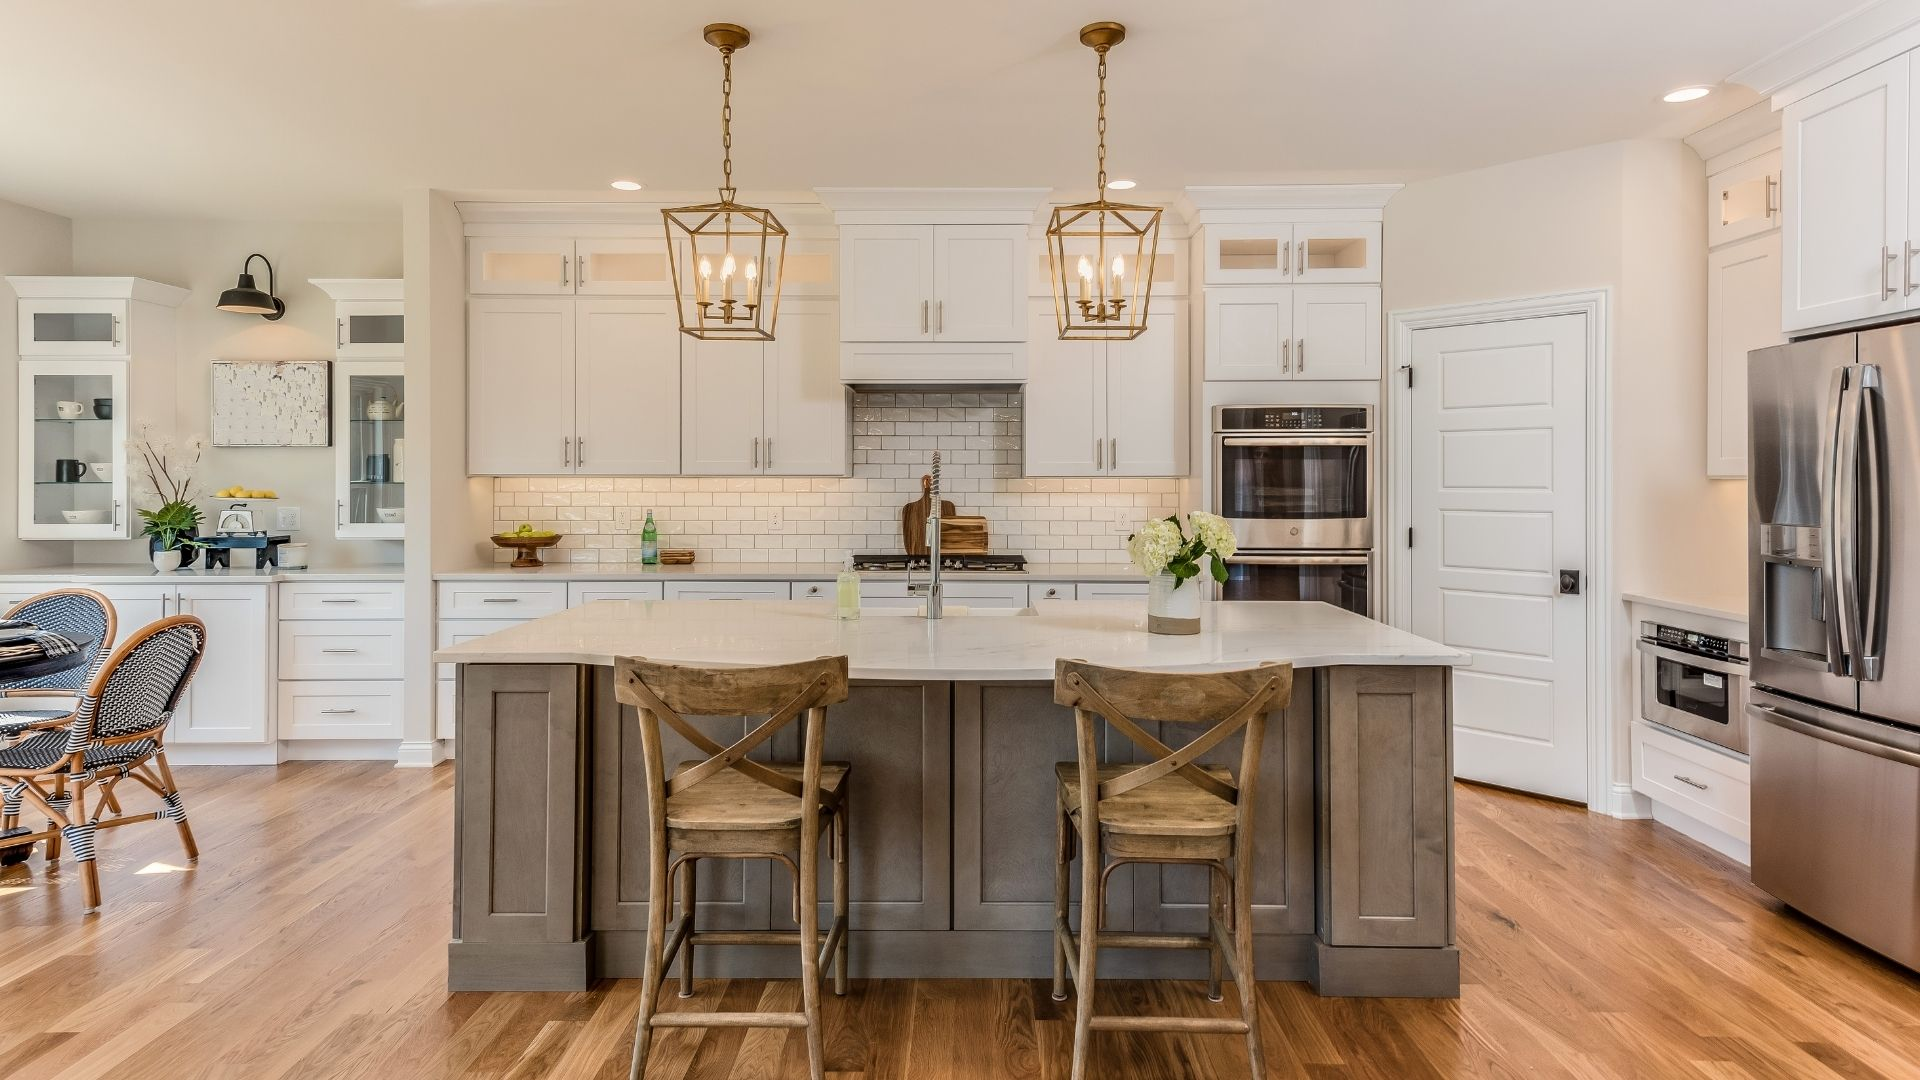 Classic kitchen design with statement lightning fixtures